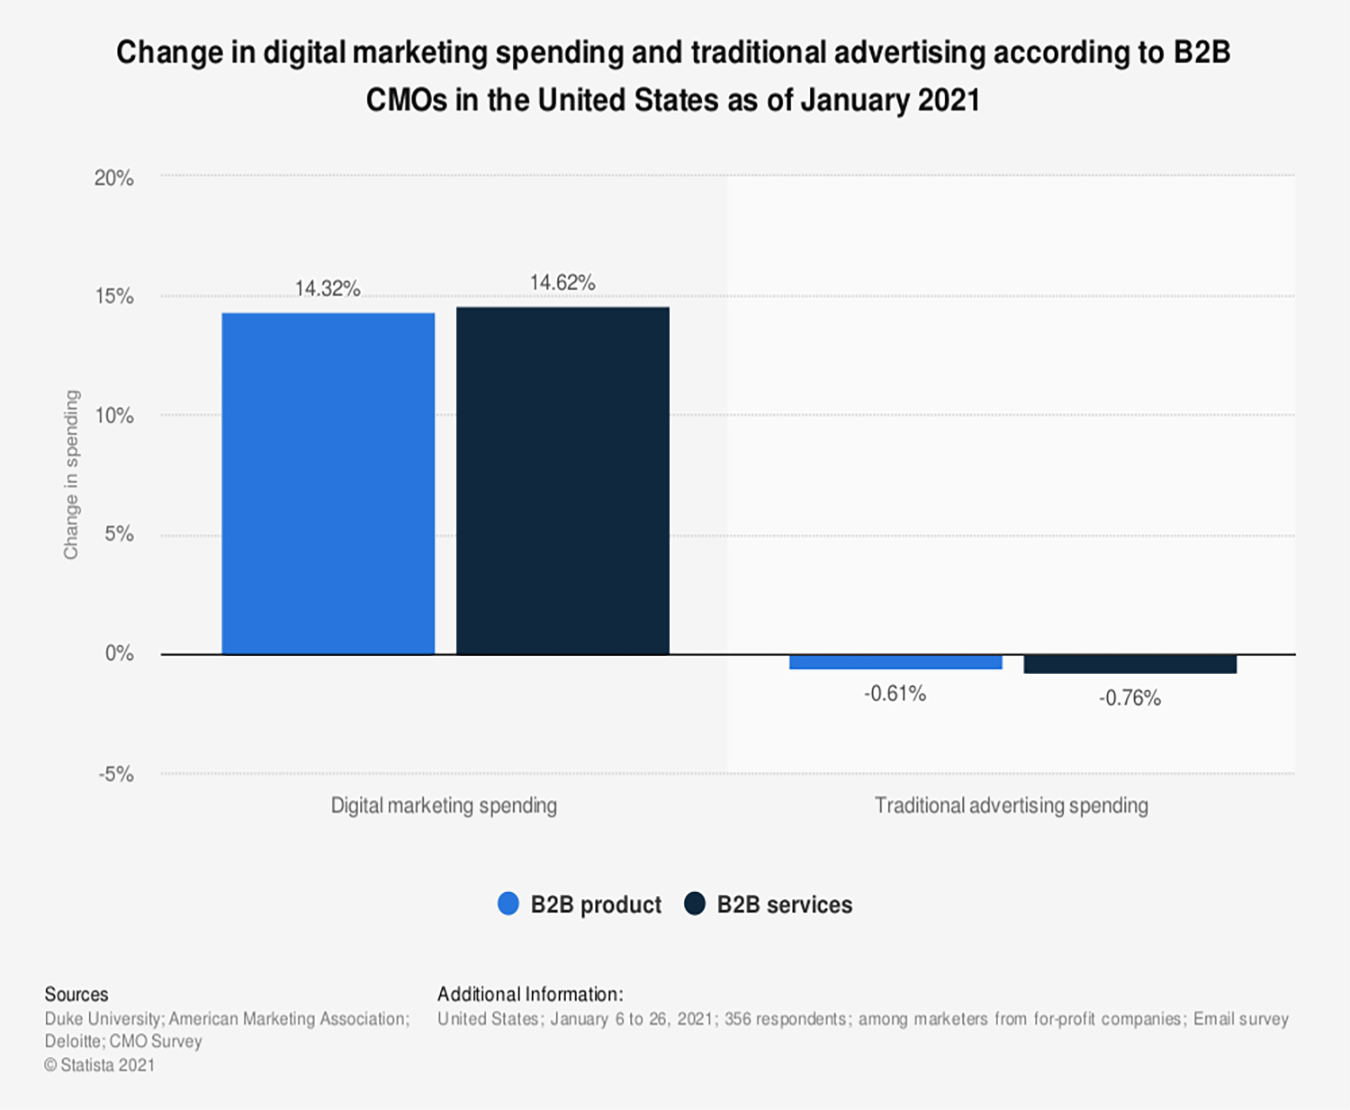 B2B Advertising Spending Priorities: In a survey conducted among U.S. B2B marketers in January 2021, respondents were asked about the changes in their spending plans on traditional and digital media. According to B2B product focused marketers their spending on traditional advertising was expected to decline by 0.61 percent in the following year, compared to the past 12 months, while digital marketing spending was projected to increase by 14.32 percent.